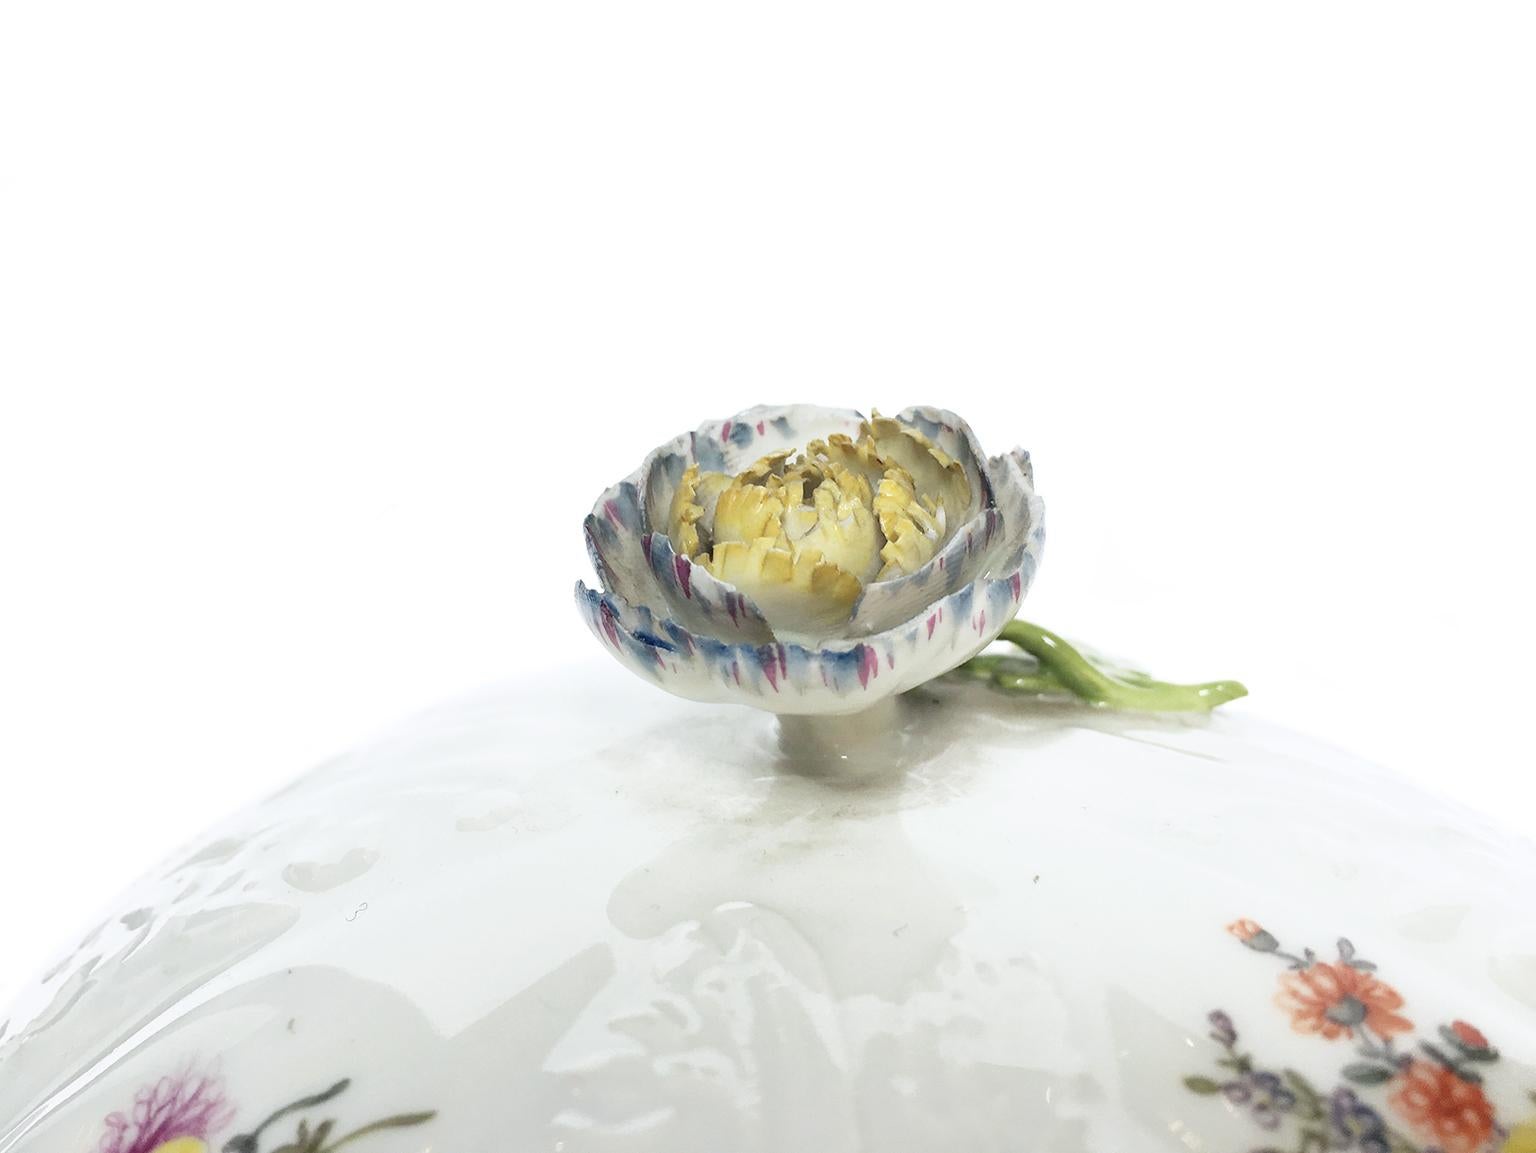 German Ancient Meissen Pair of Porcelain Sugar Bowls with Flower Knobs, Circa 1760 For Sale